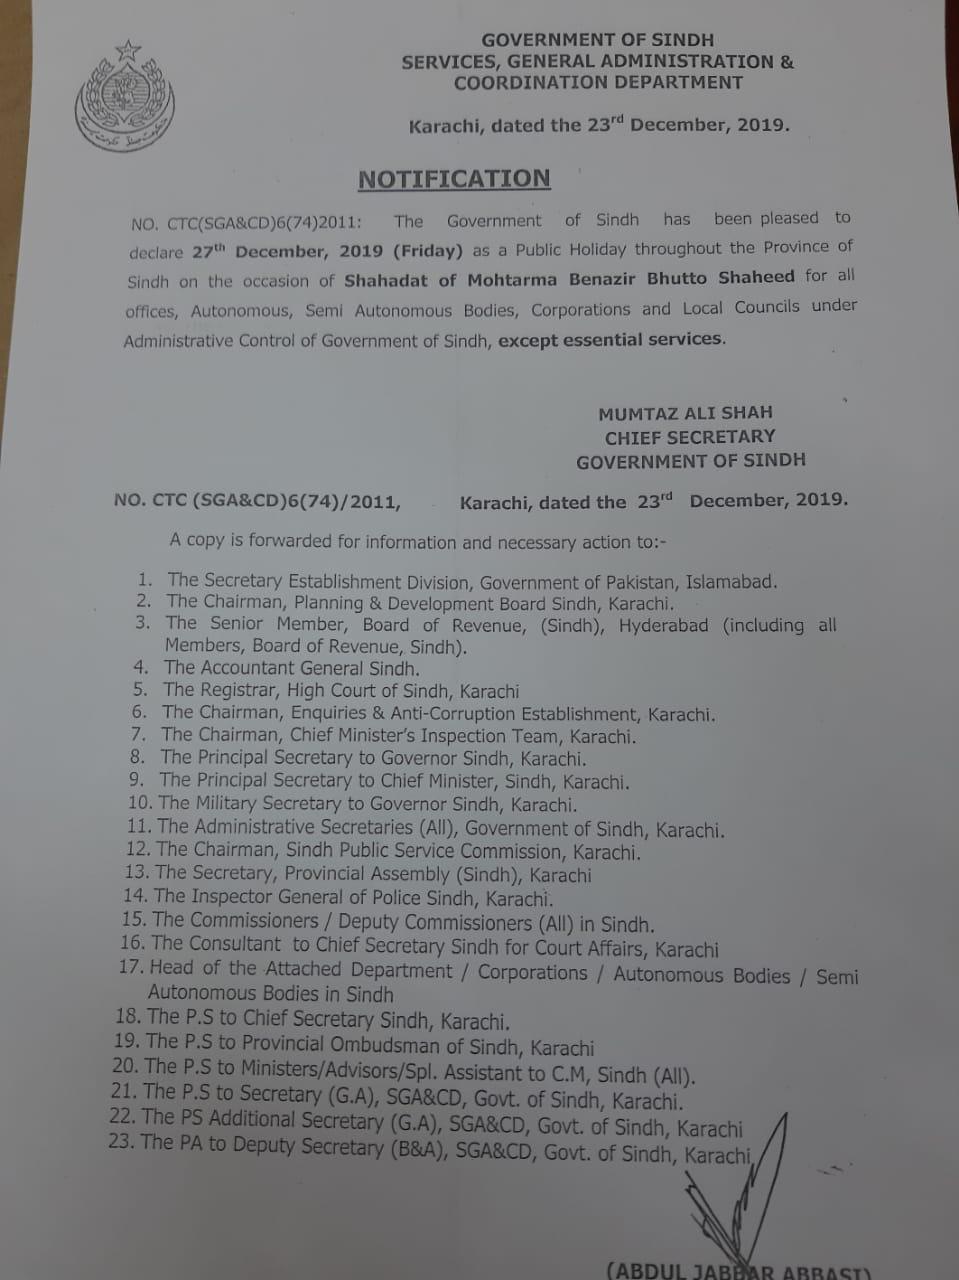 Notification of Holiday on 27th Dec 2019